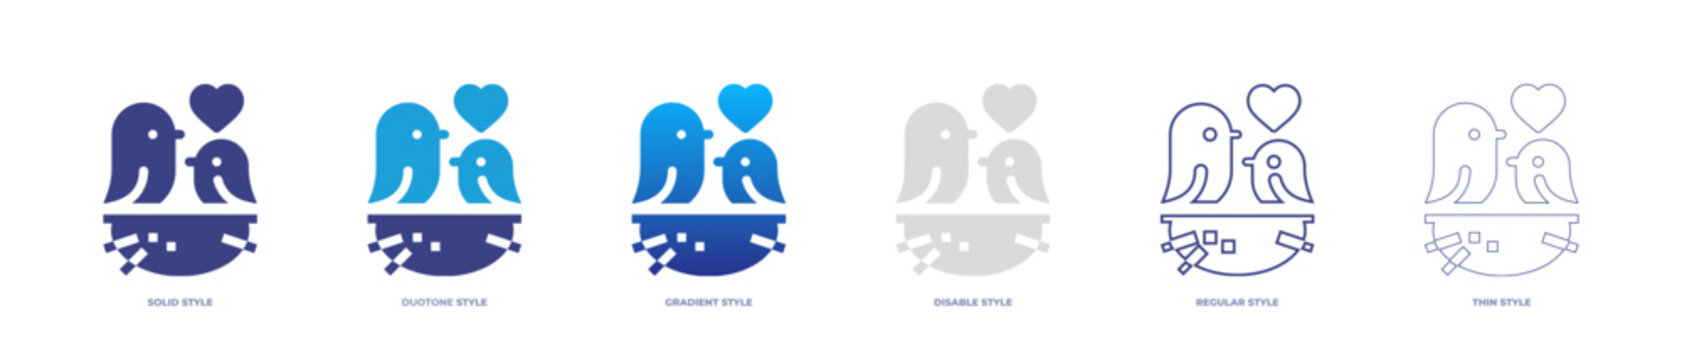 Bird couple icon set full style. Solid, disable, gradient, duotone, regular, thin. Vector illustration and transparent icon.